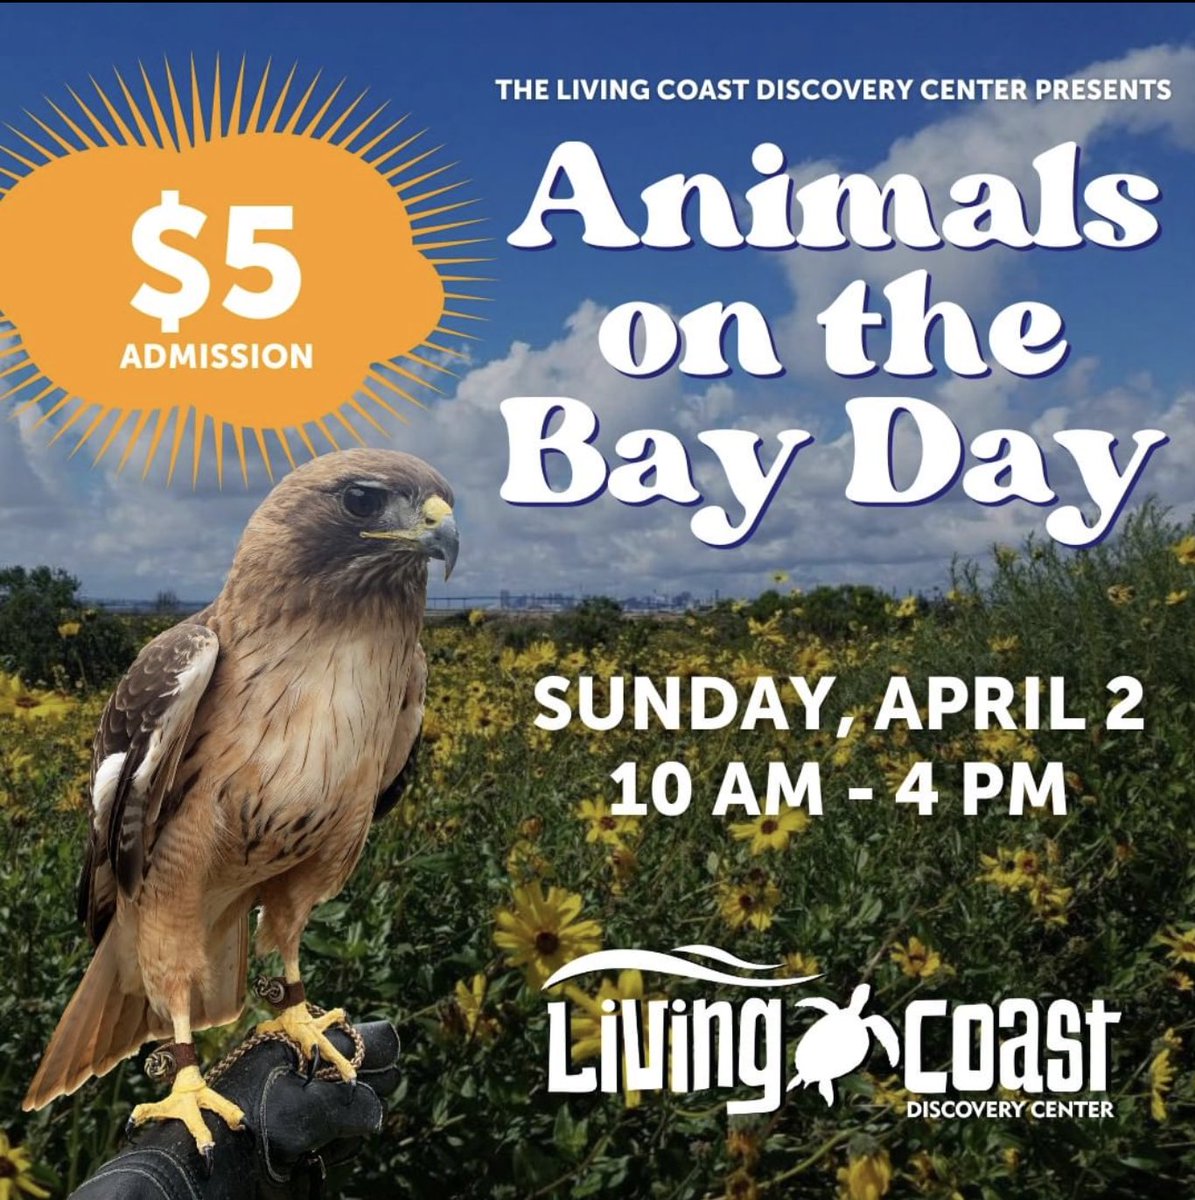 Animals on the Bay Day is Back at the @thelivingcoast ! Join them on Sunday, April 2 from 10 AM to 4 PM for this reduced admission day full of education, conservation, and fun! Learn more at the link in their bio. passporttosandiego.com/company/living… #sandiego #chulavista #animals